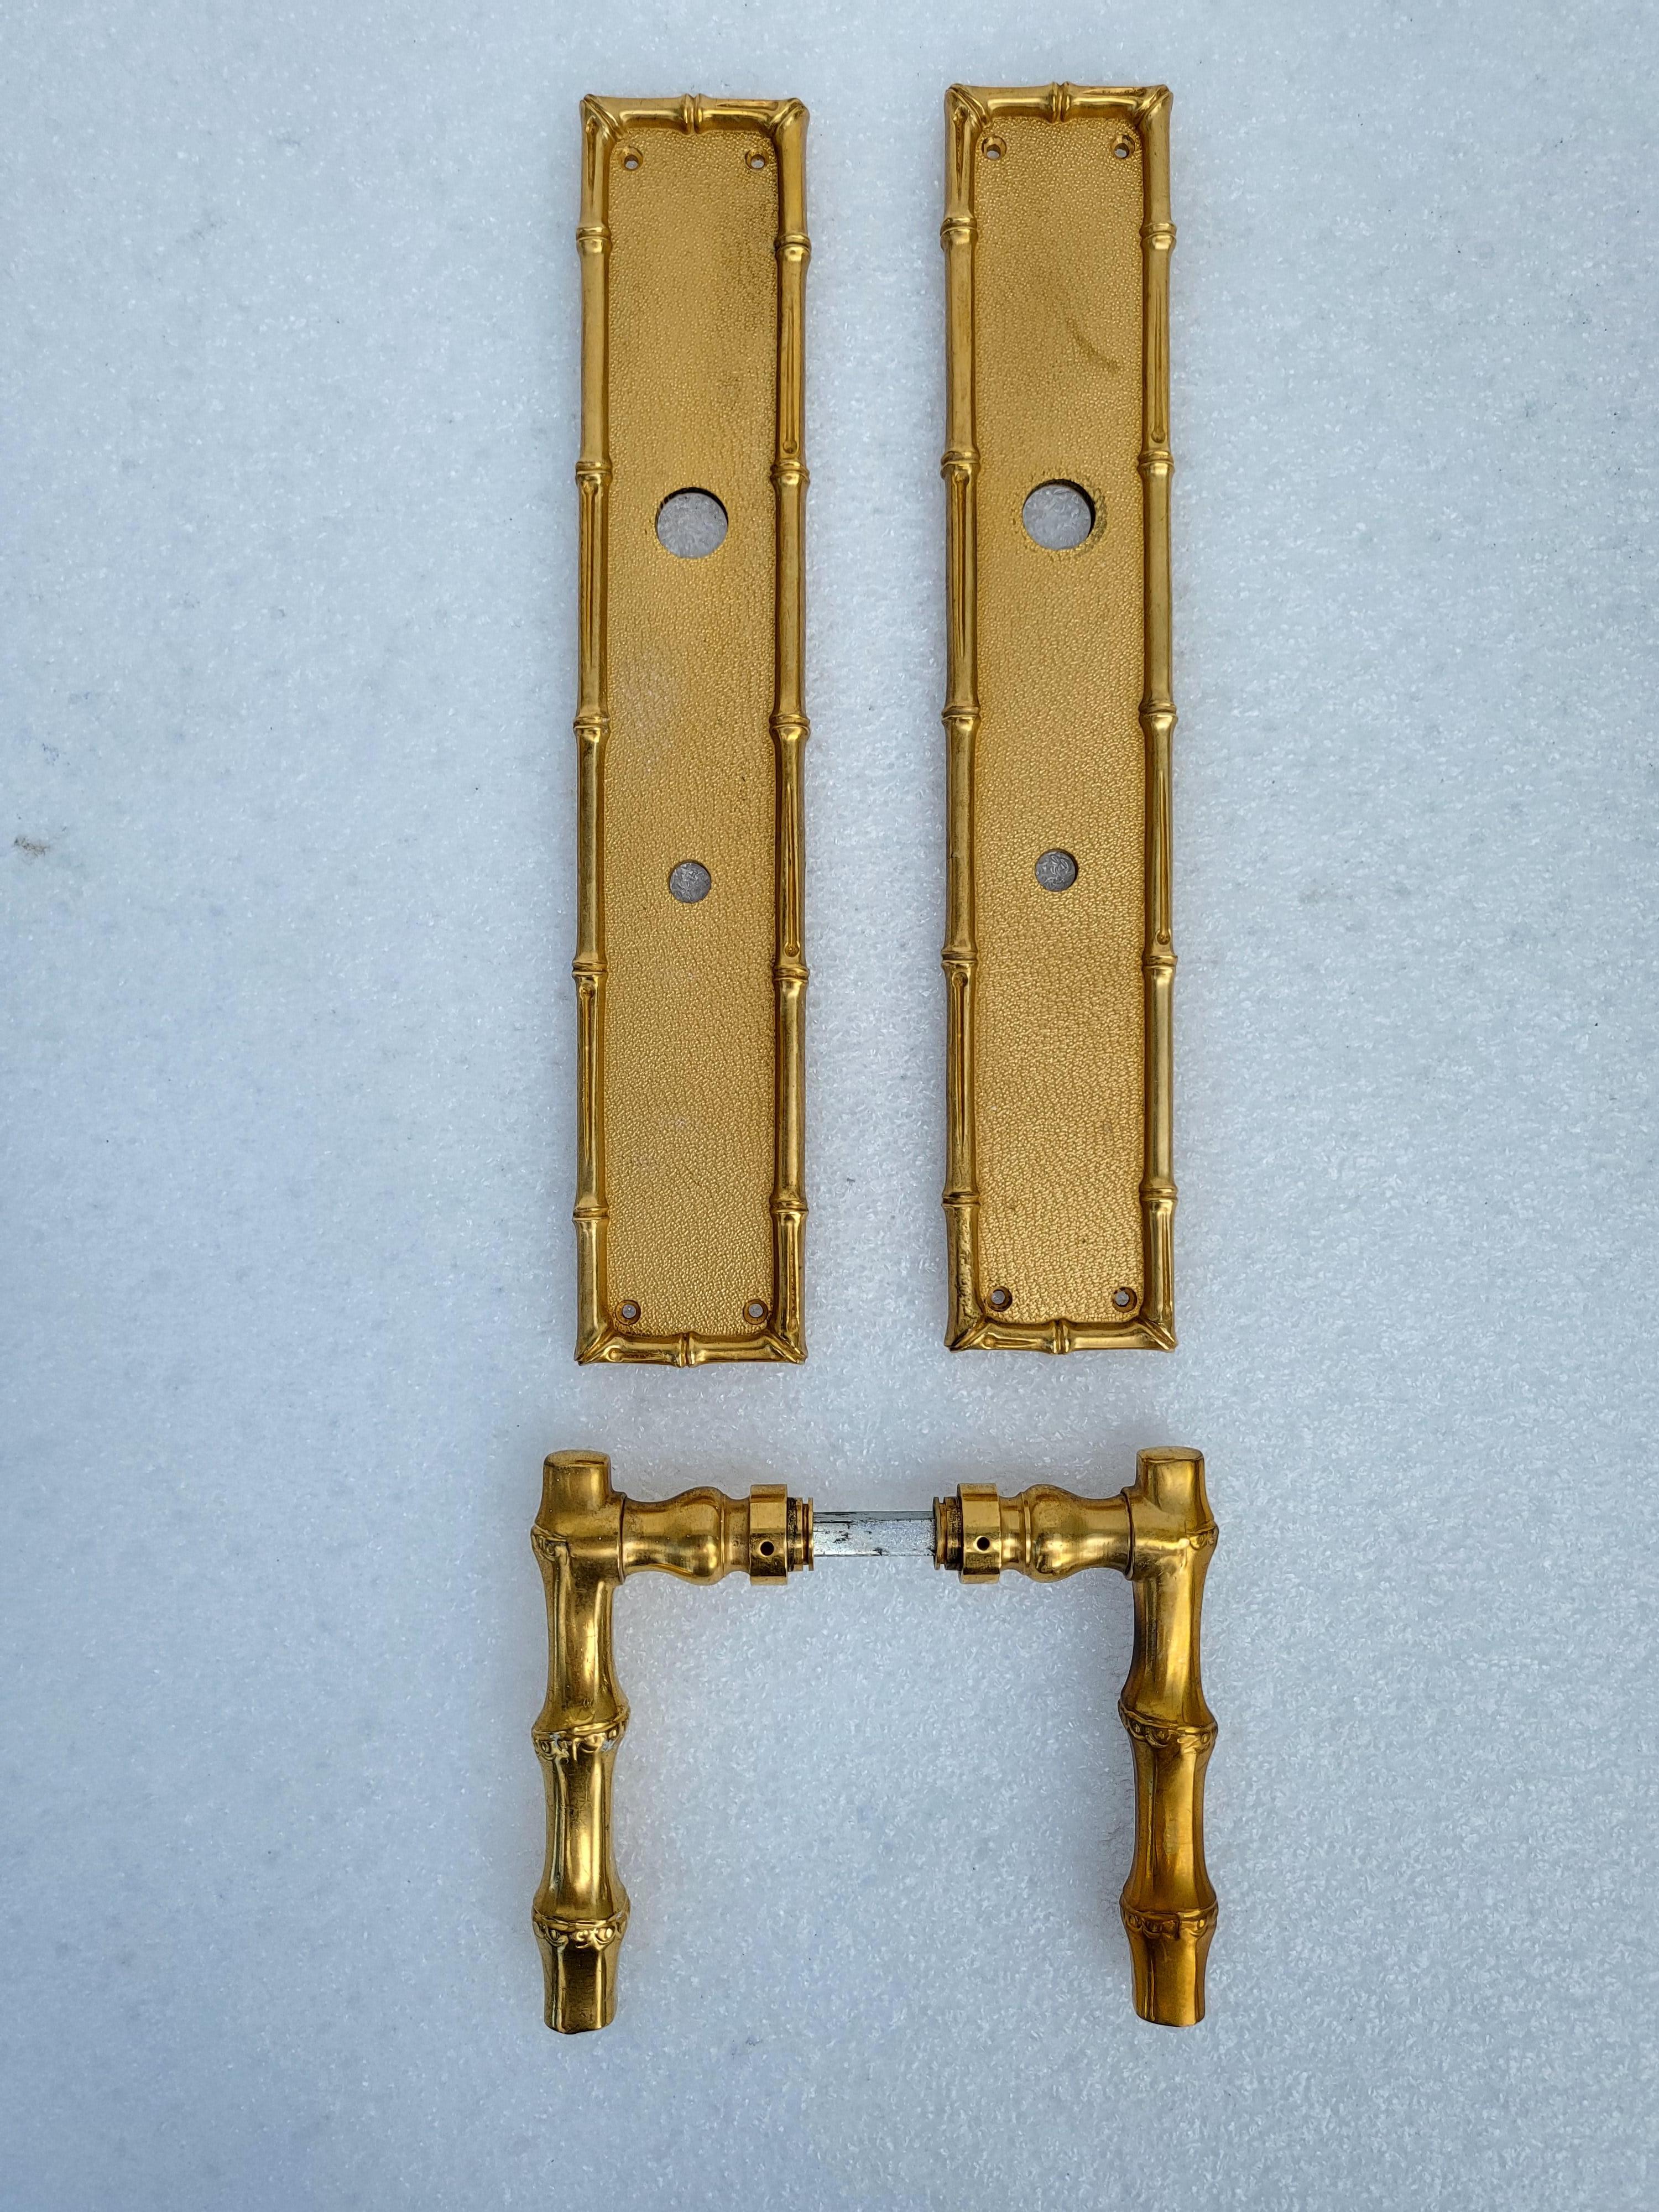 Exceptional and rare set of 12 door handles by Maison Baguès. Executed in bronze.
Only one pair pictured
Priced by pair
Total for a 1 set: Four pieces for a complete set.
Dimensions for the rectangular part: 9.5